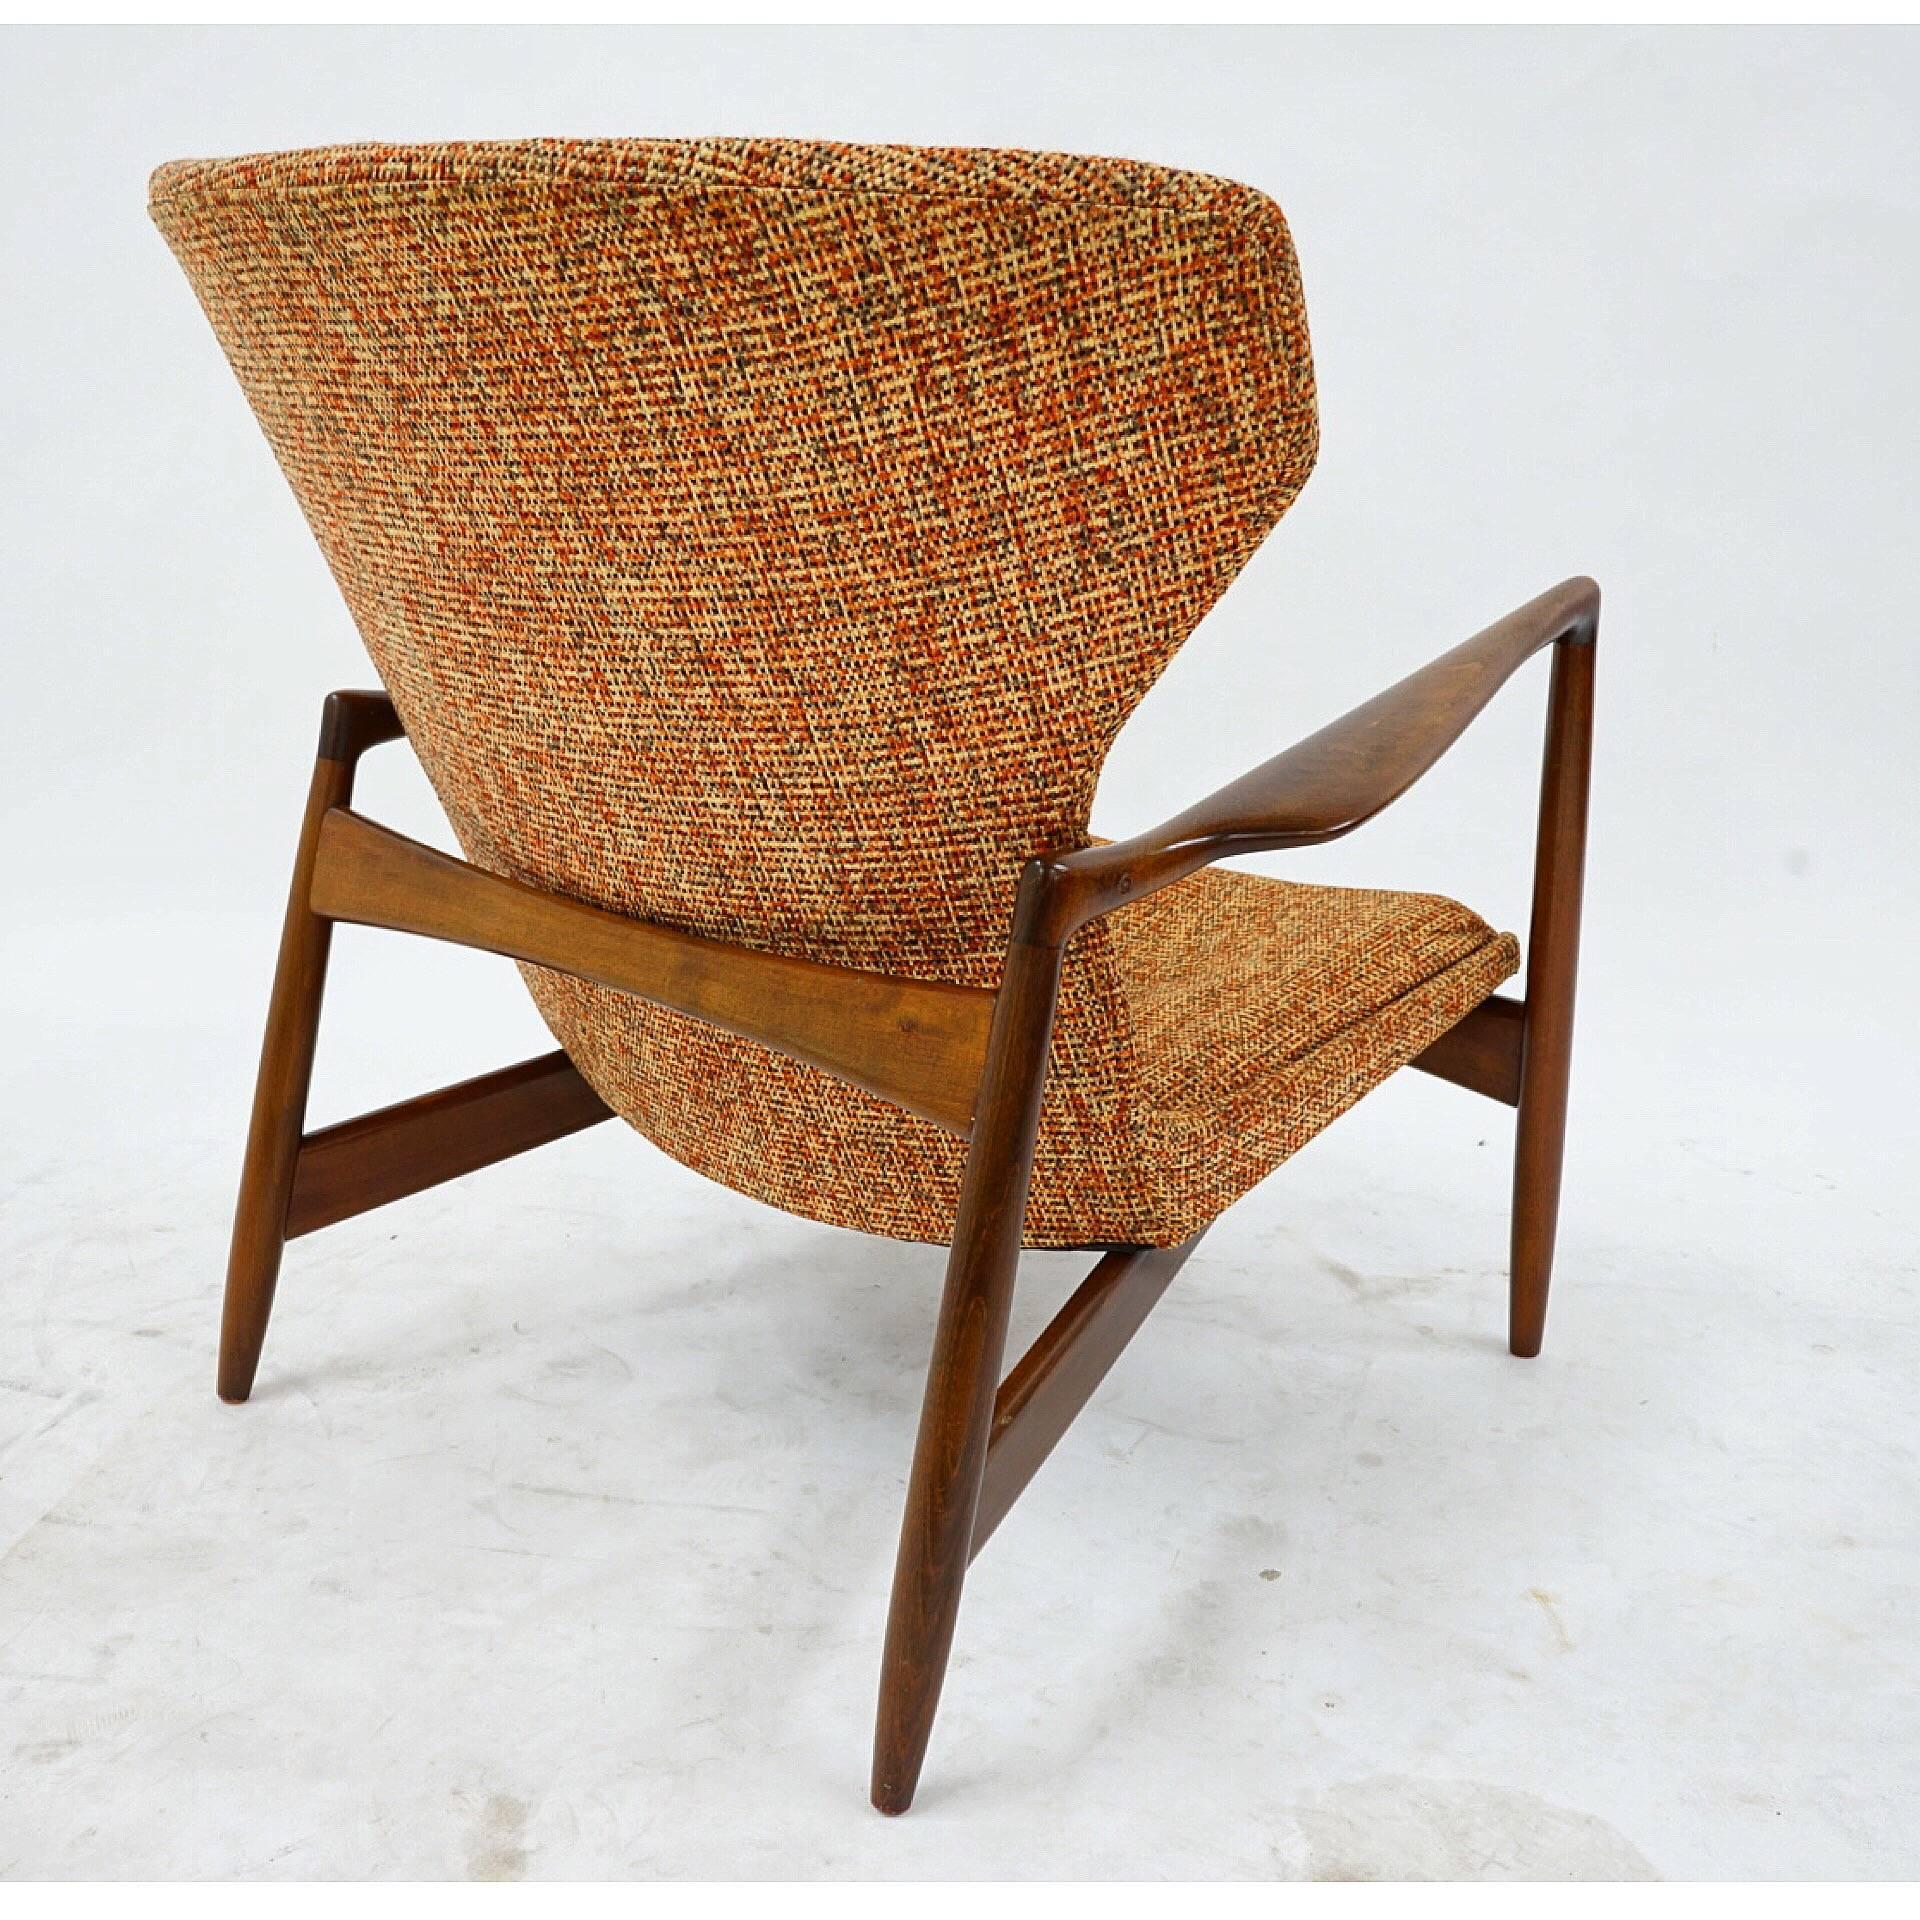 Rare Kofod-Larsen wingback lounger all original from the 1950s, has all the badges and labels.